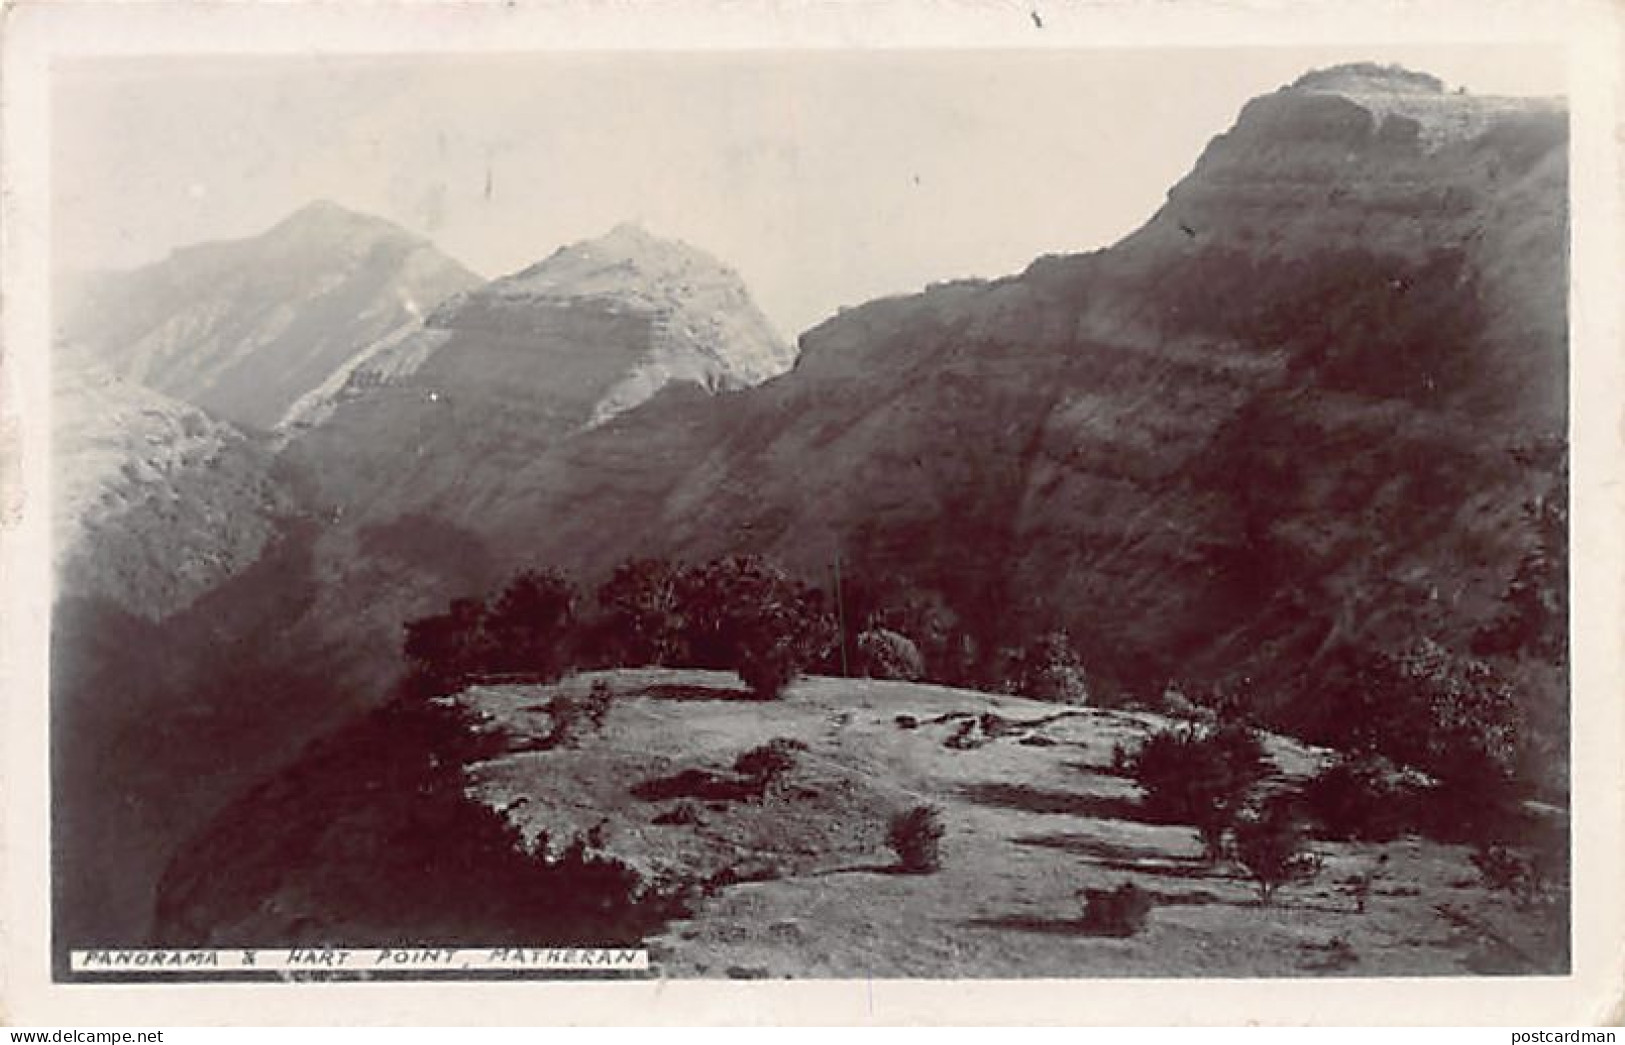 India - MATHERAN - Panorama & Hart Point - REAL PHOTO - Publ. Unknown  - India